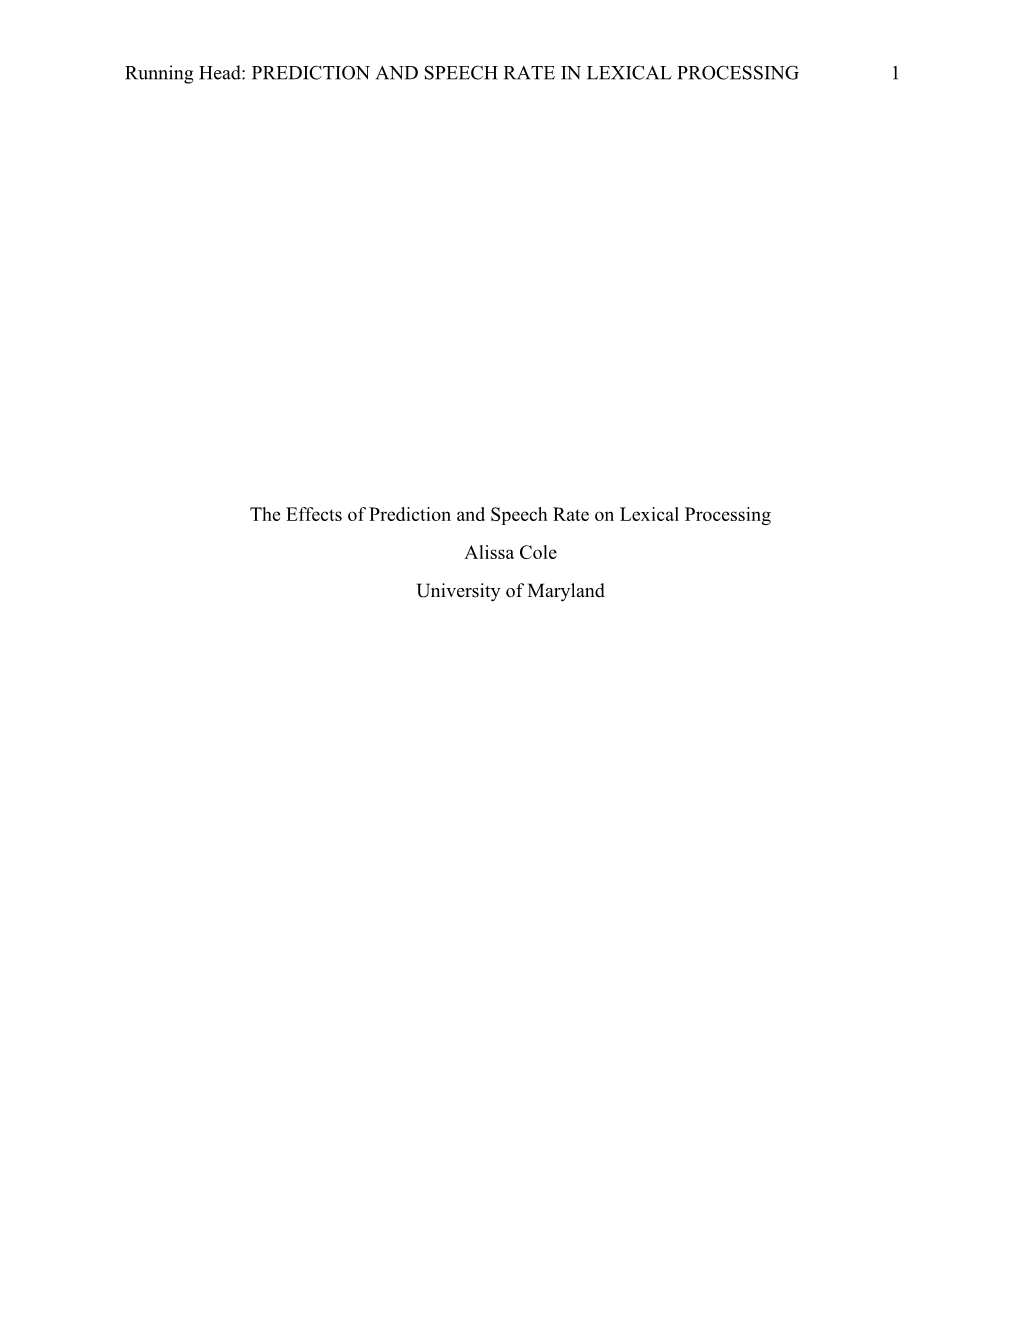 Running Head: PREDICTION and SPEECH RATE in LEXICAL PROCESSING 1